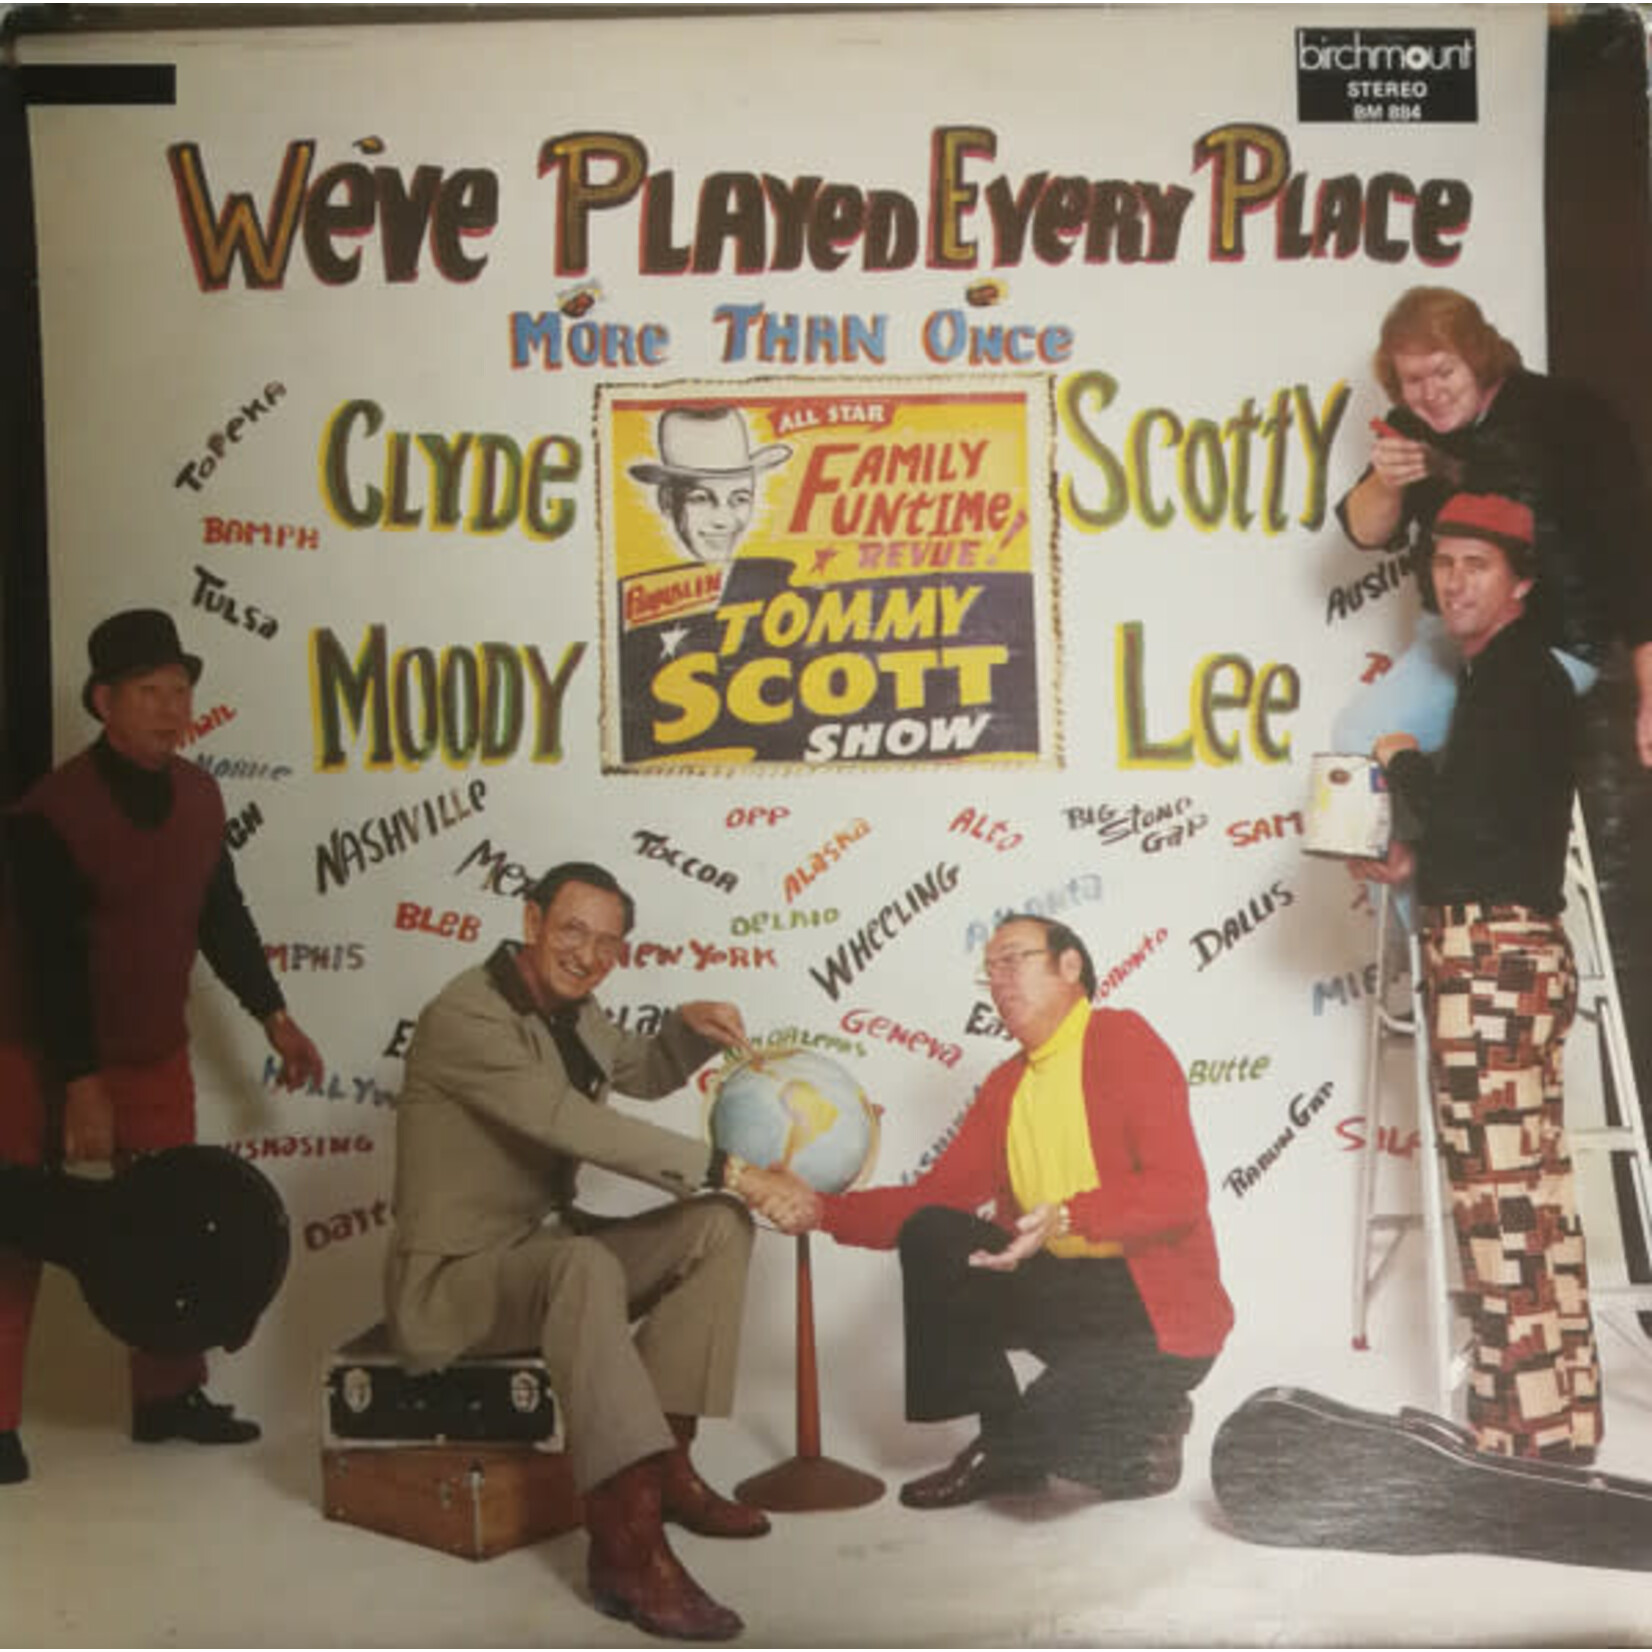 Tommy Scott & Clyde Moody – We've Played Every Place More Than Once (VG, 1978, LP, Birchmount – BM 884)